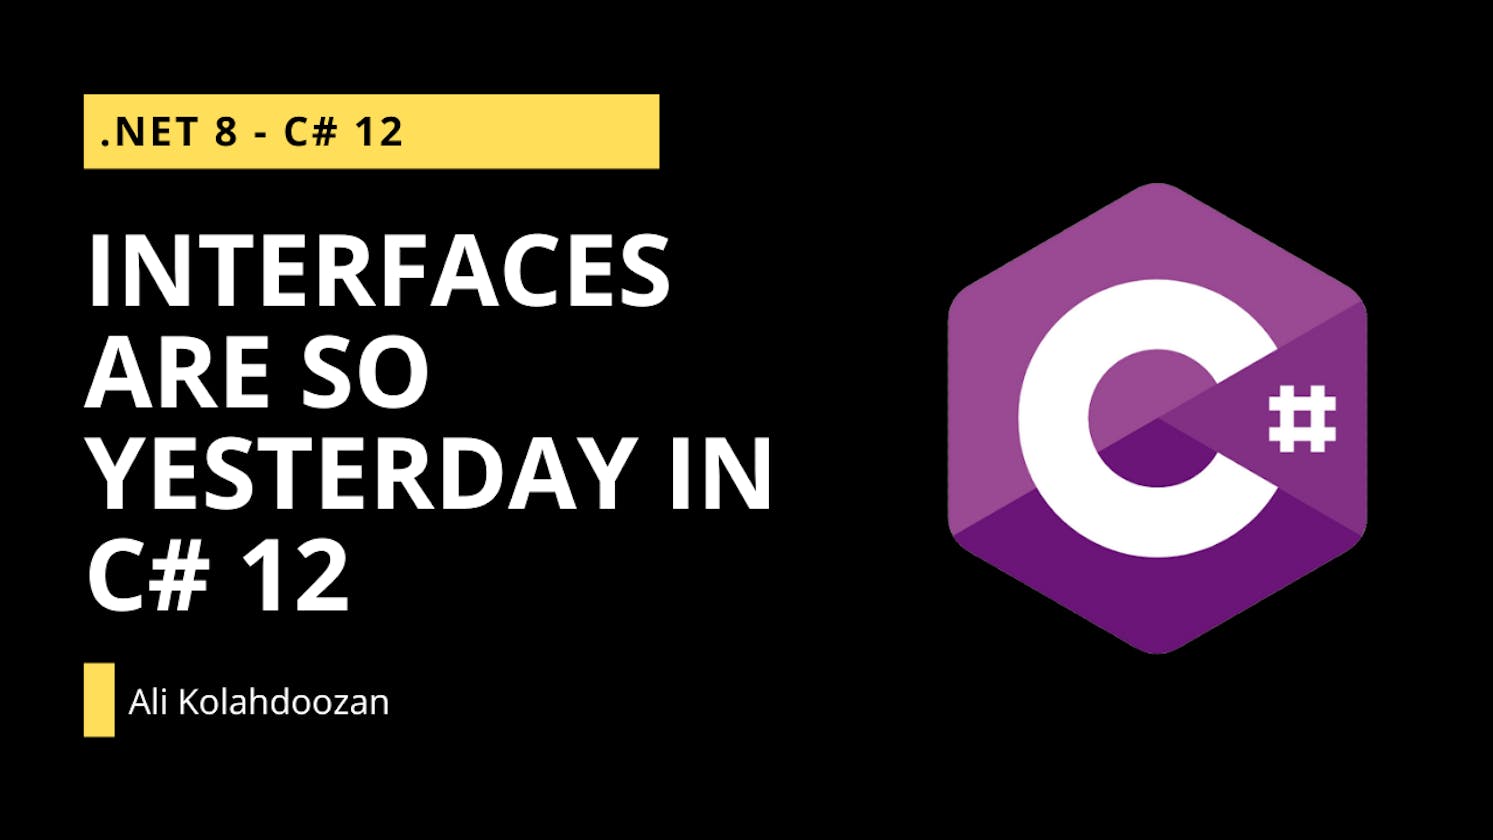 Interfaces are so yesterday in C# 12